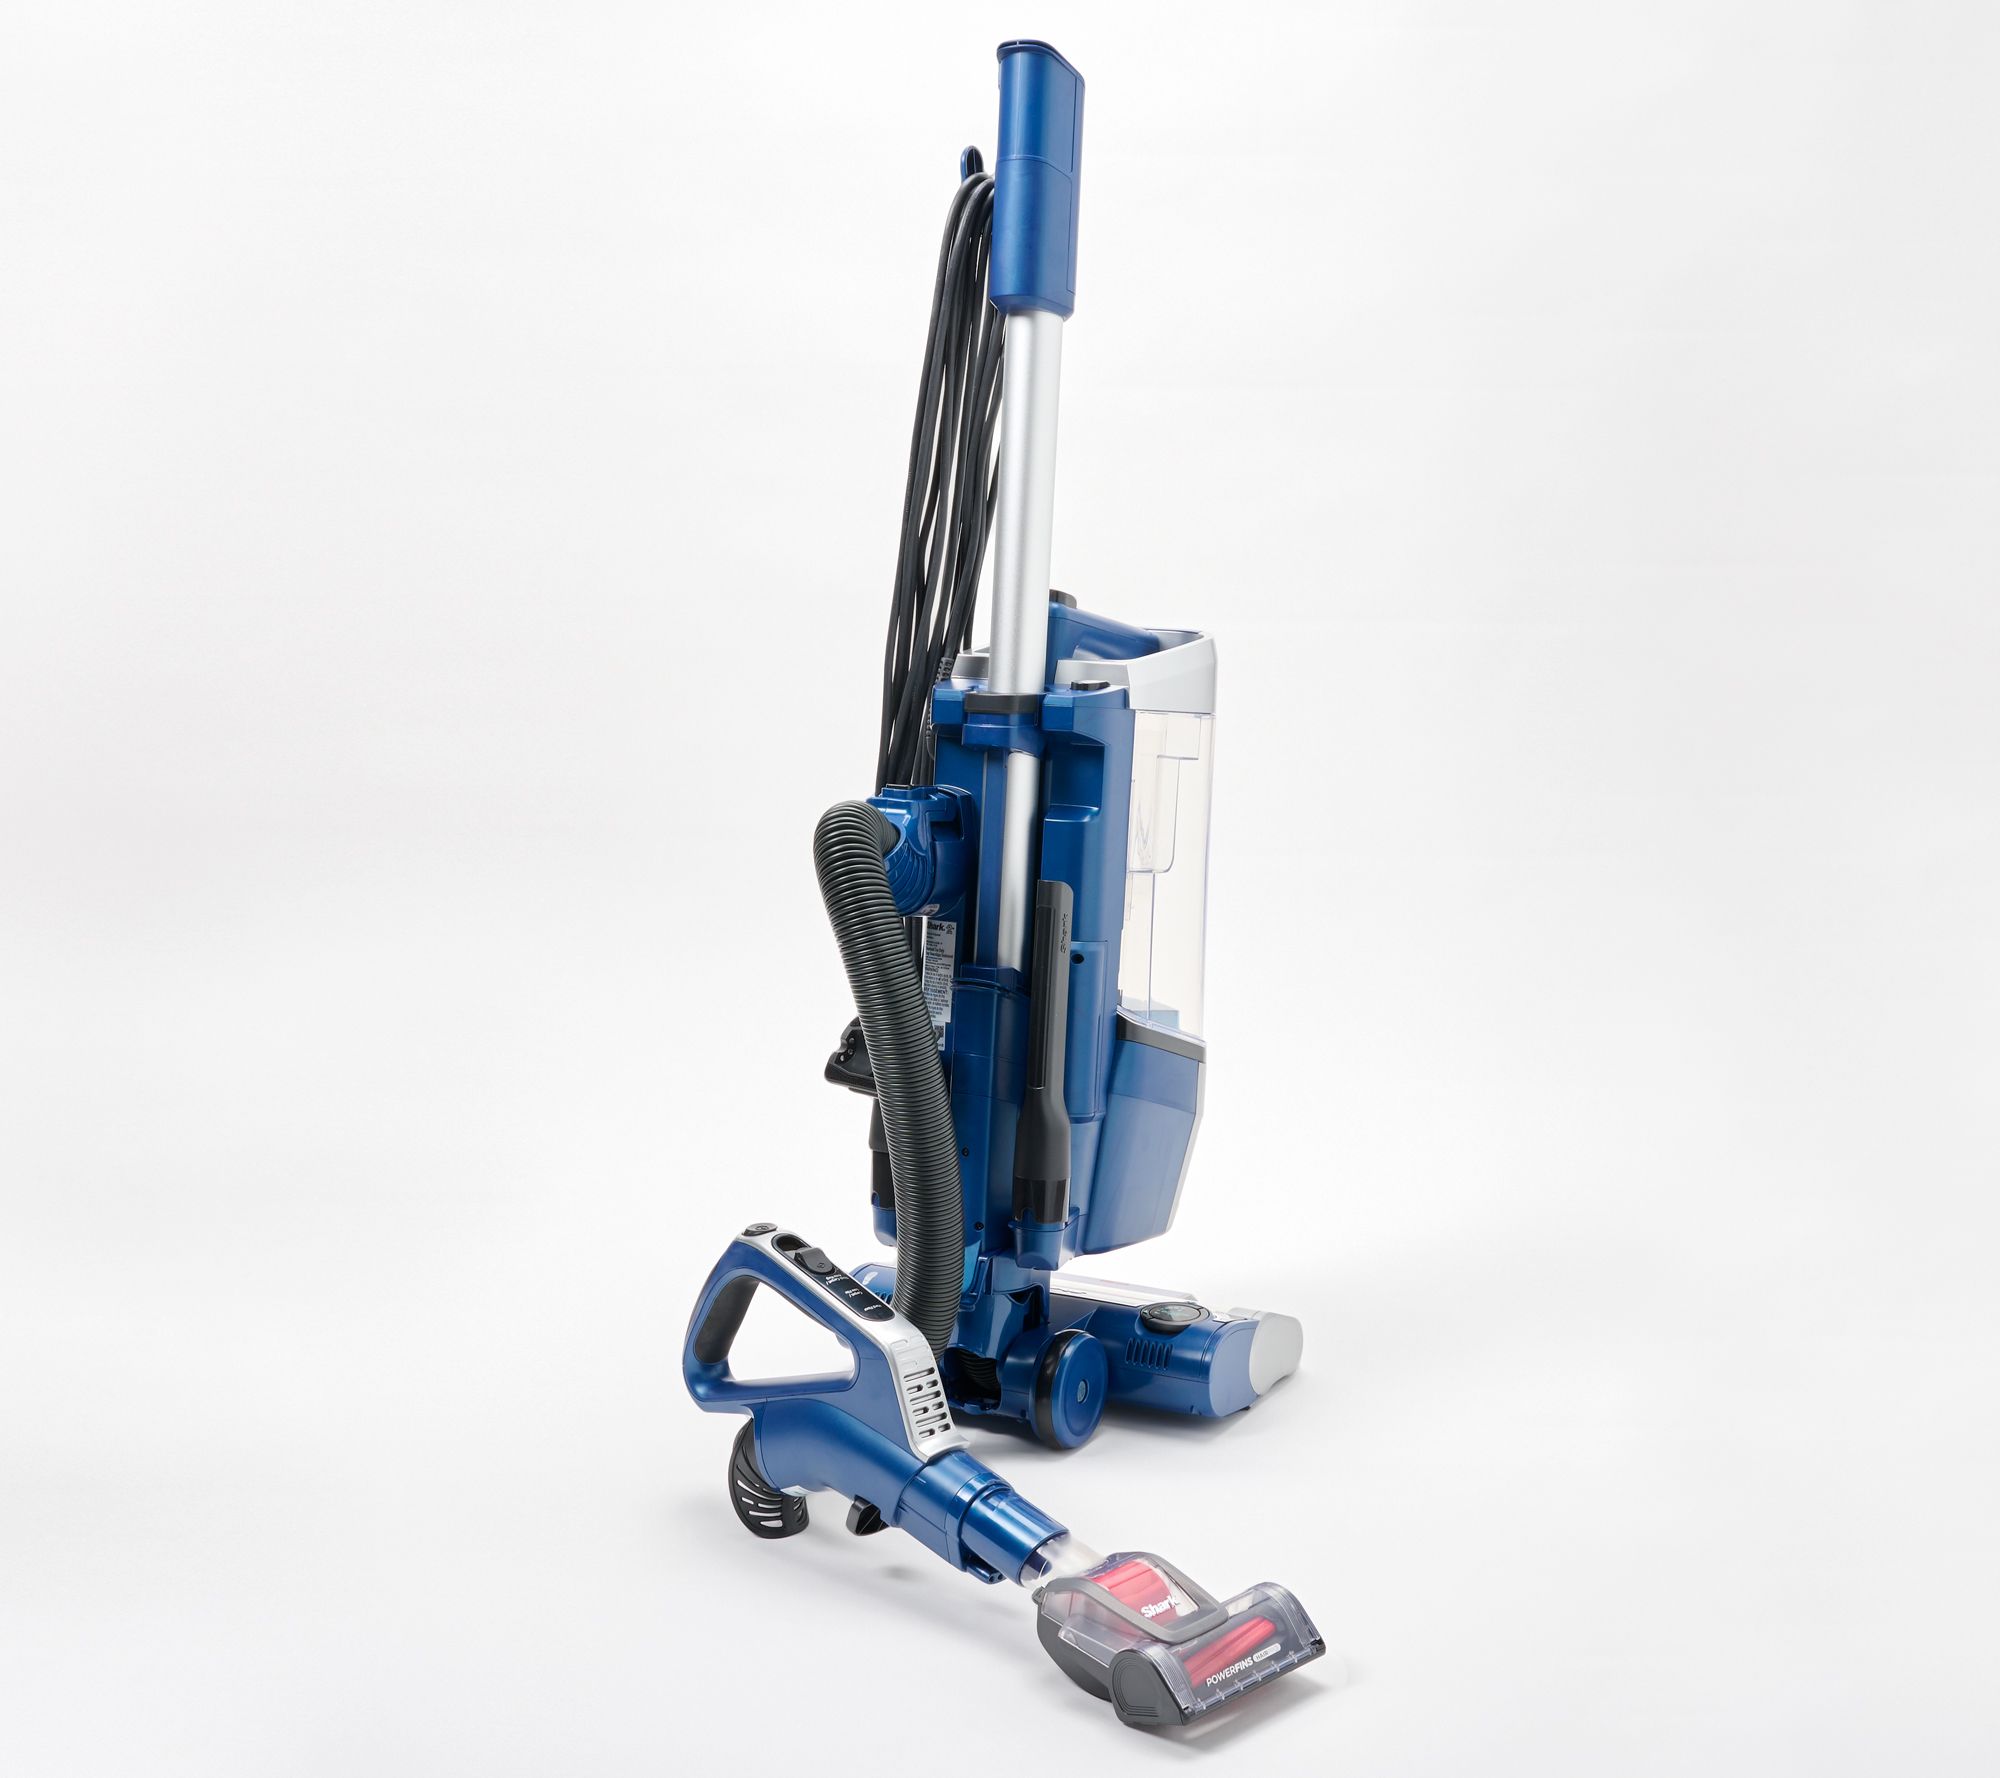 Shark Stratos Upright Vacuum With Duoclean Powerfins & Reviews